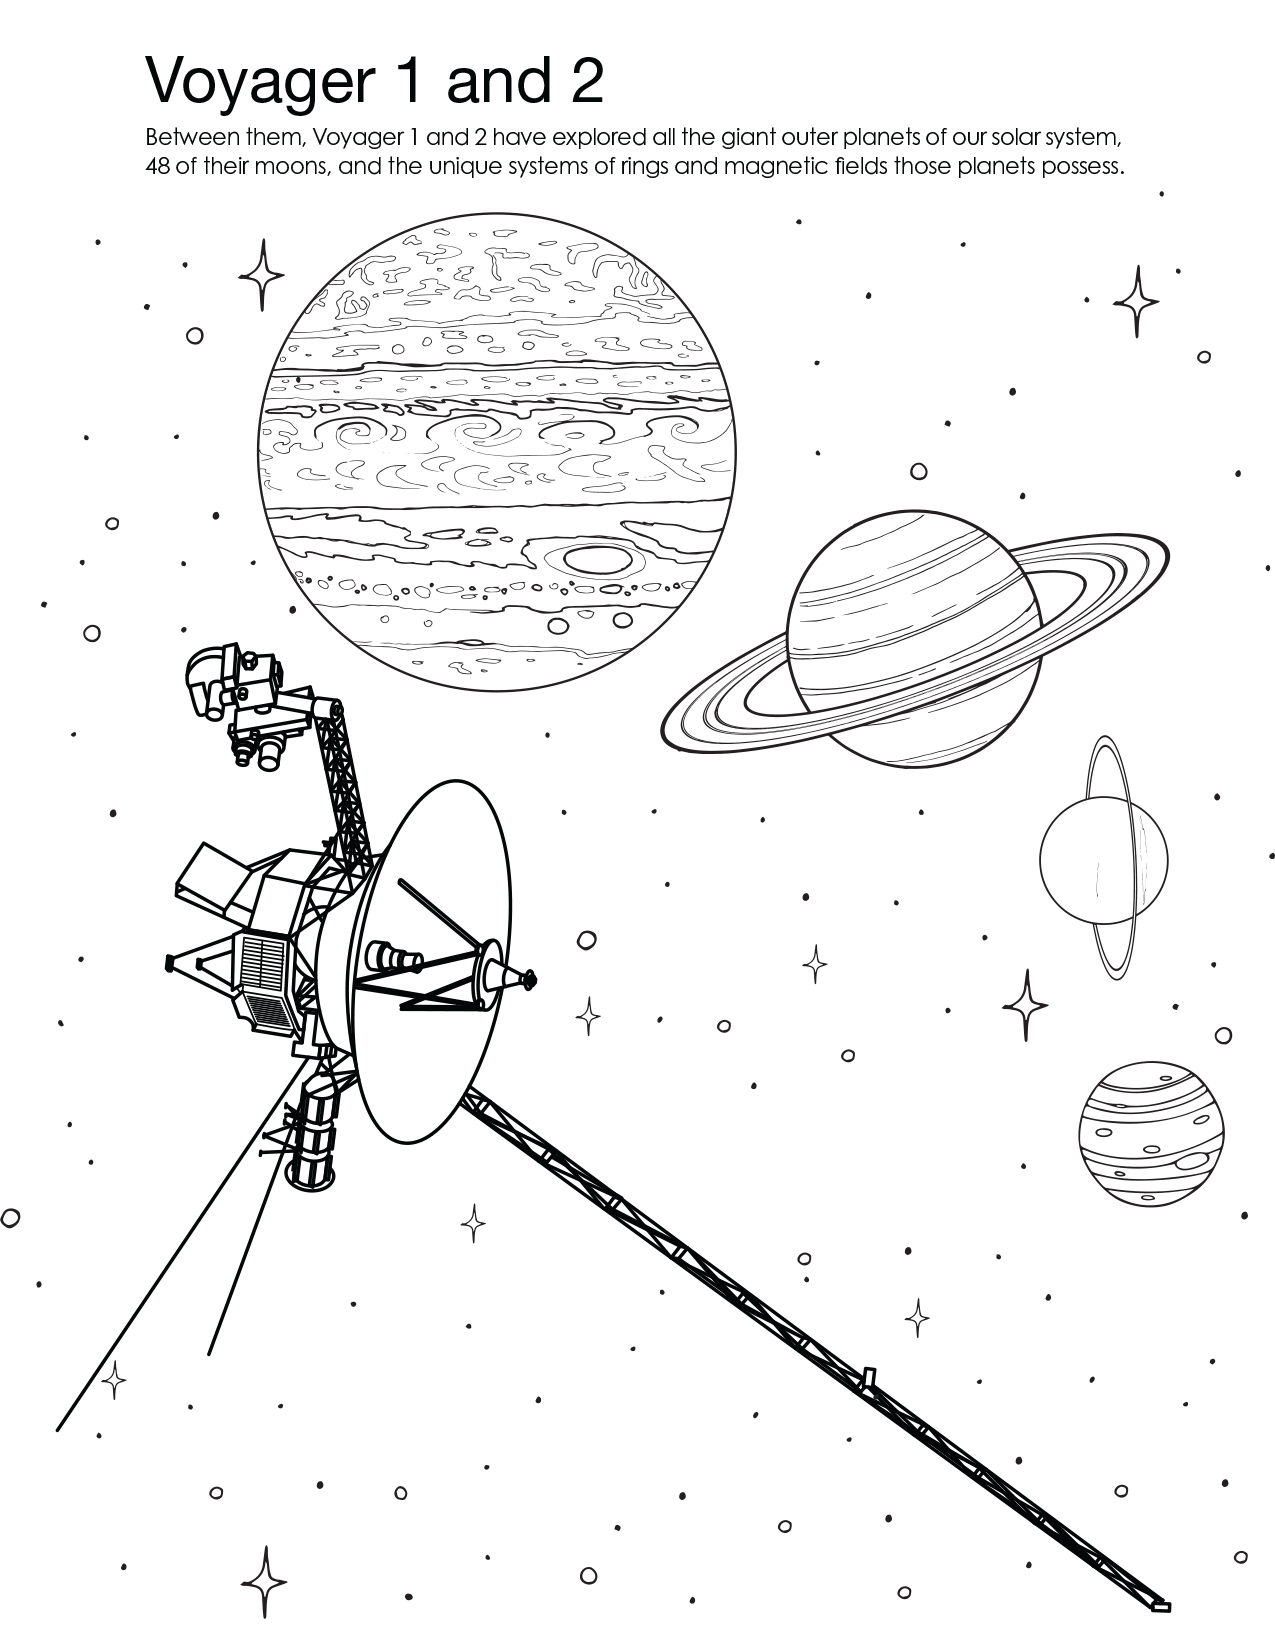 Coloring page for Voyager 1 & 2.